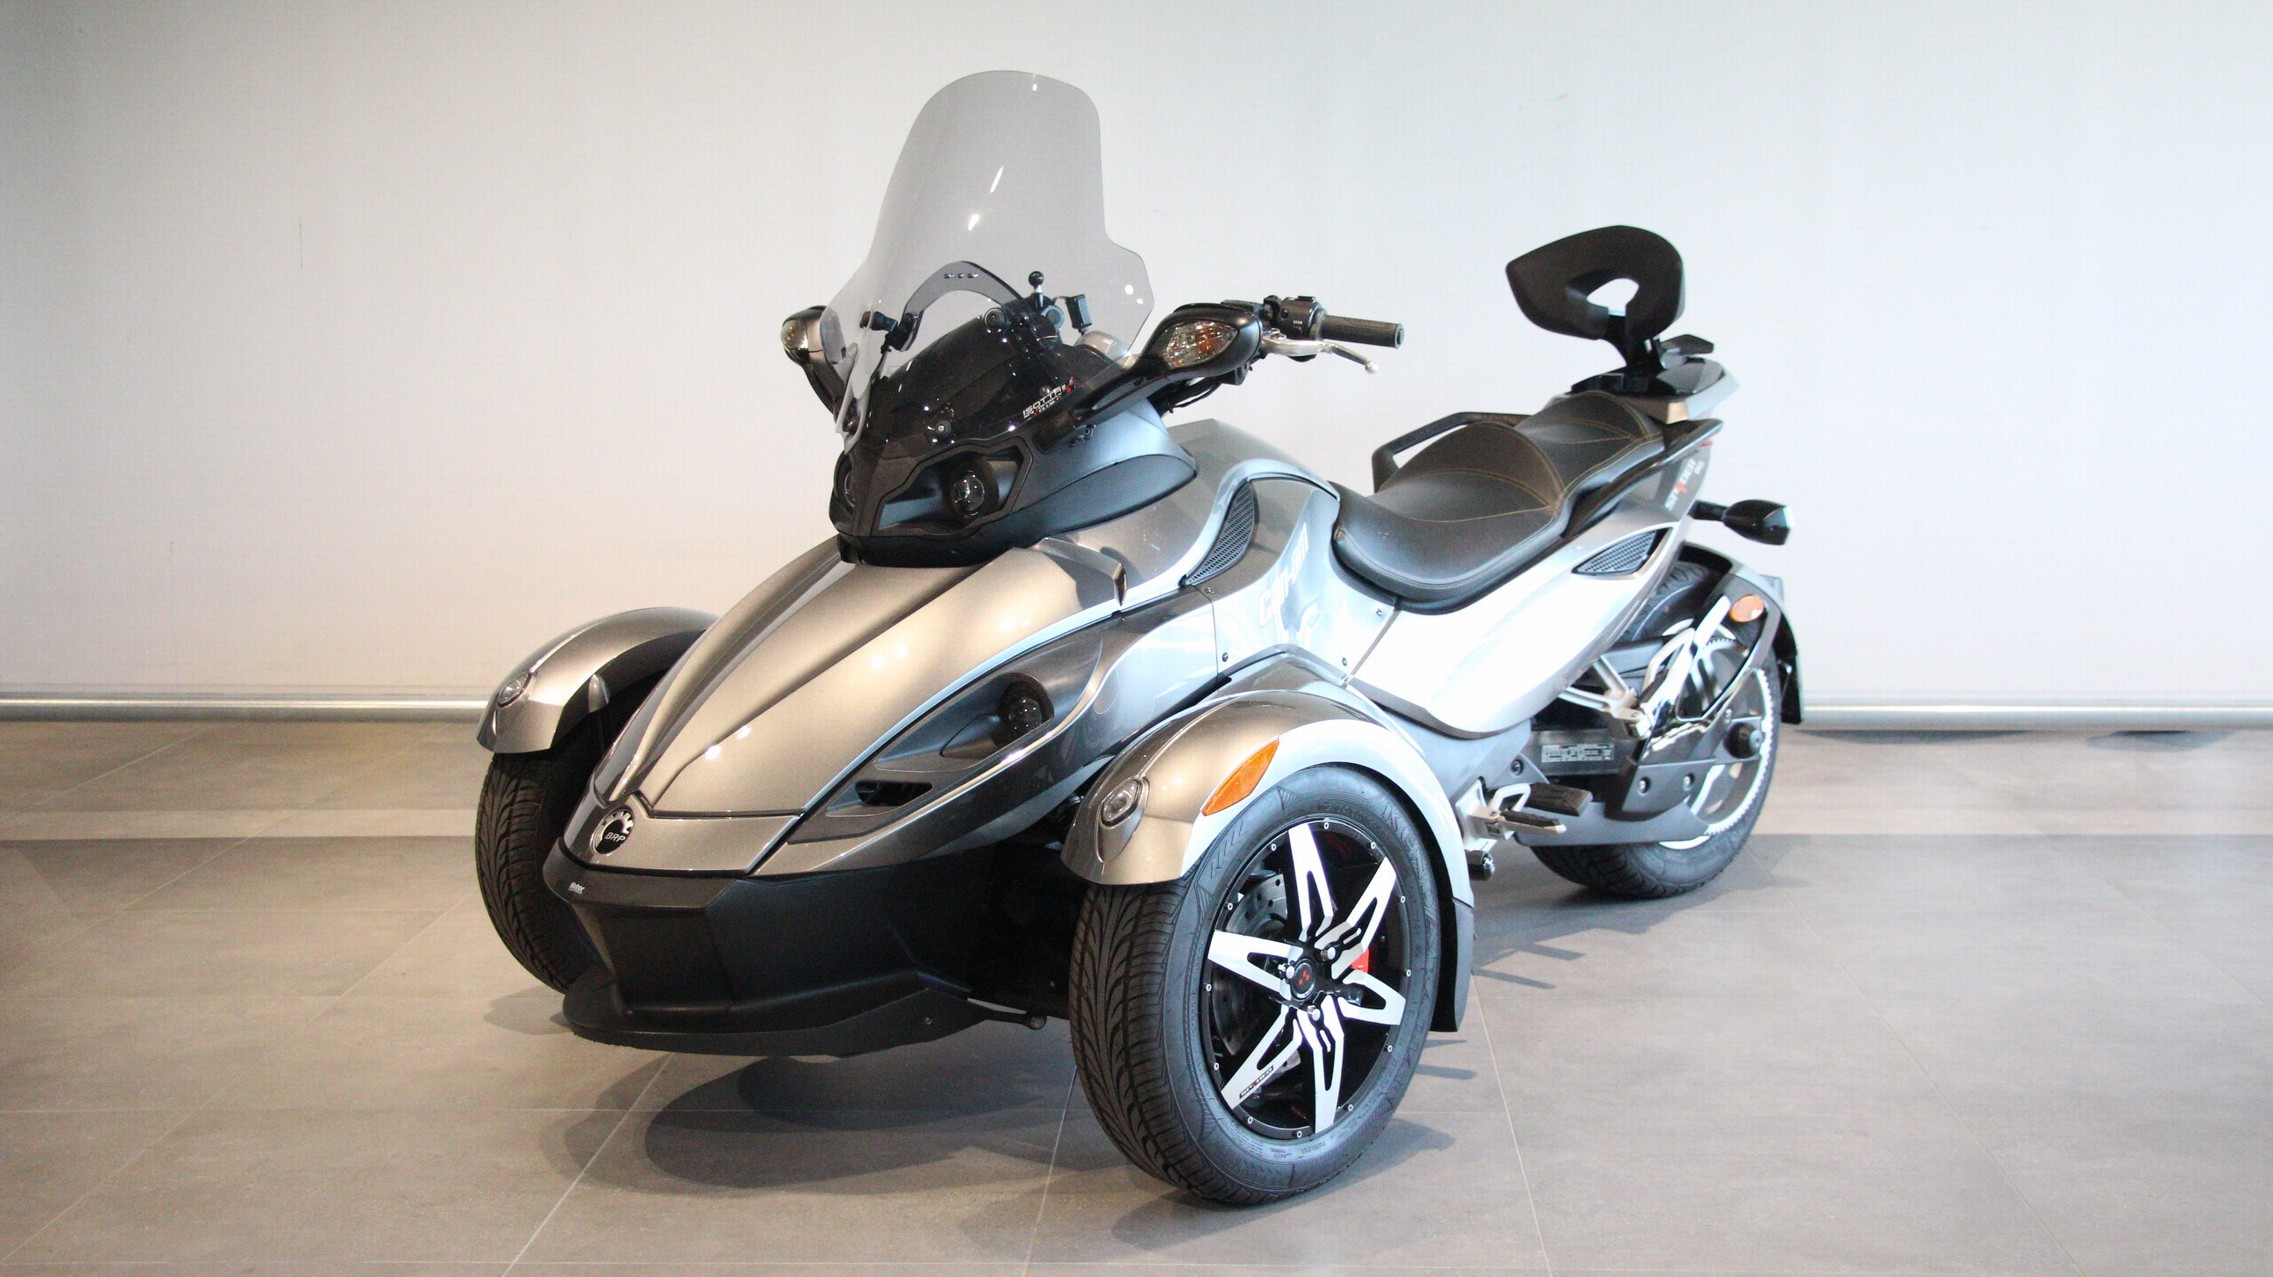 CAN-AM - SPYDER RS 990 SM5